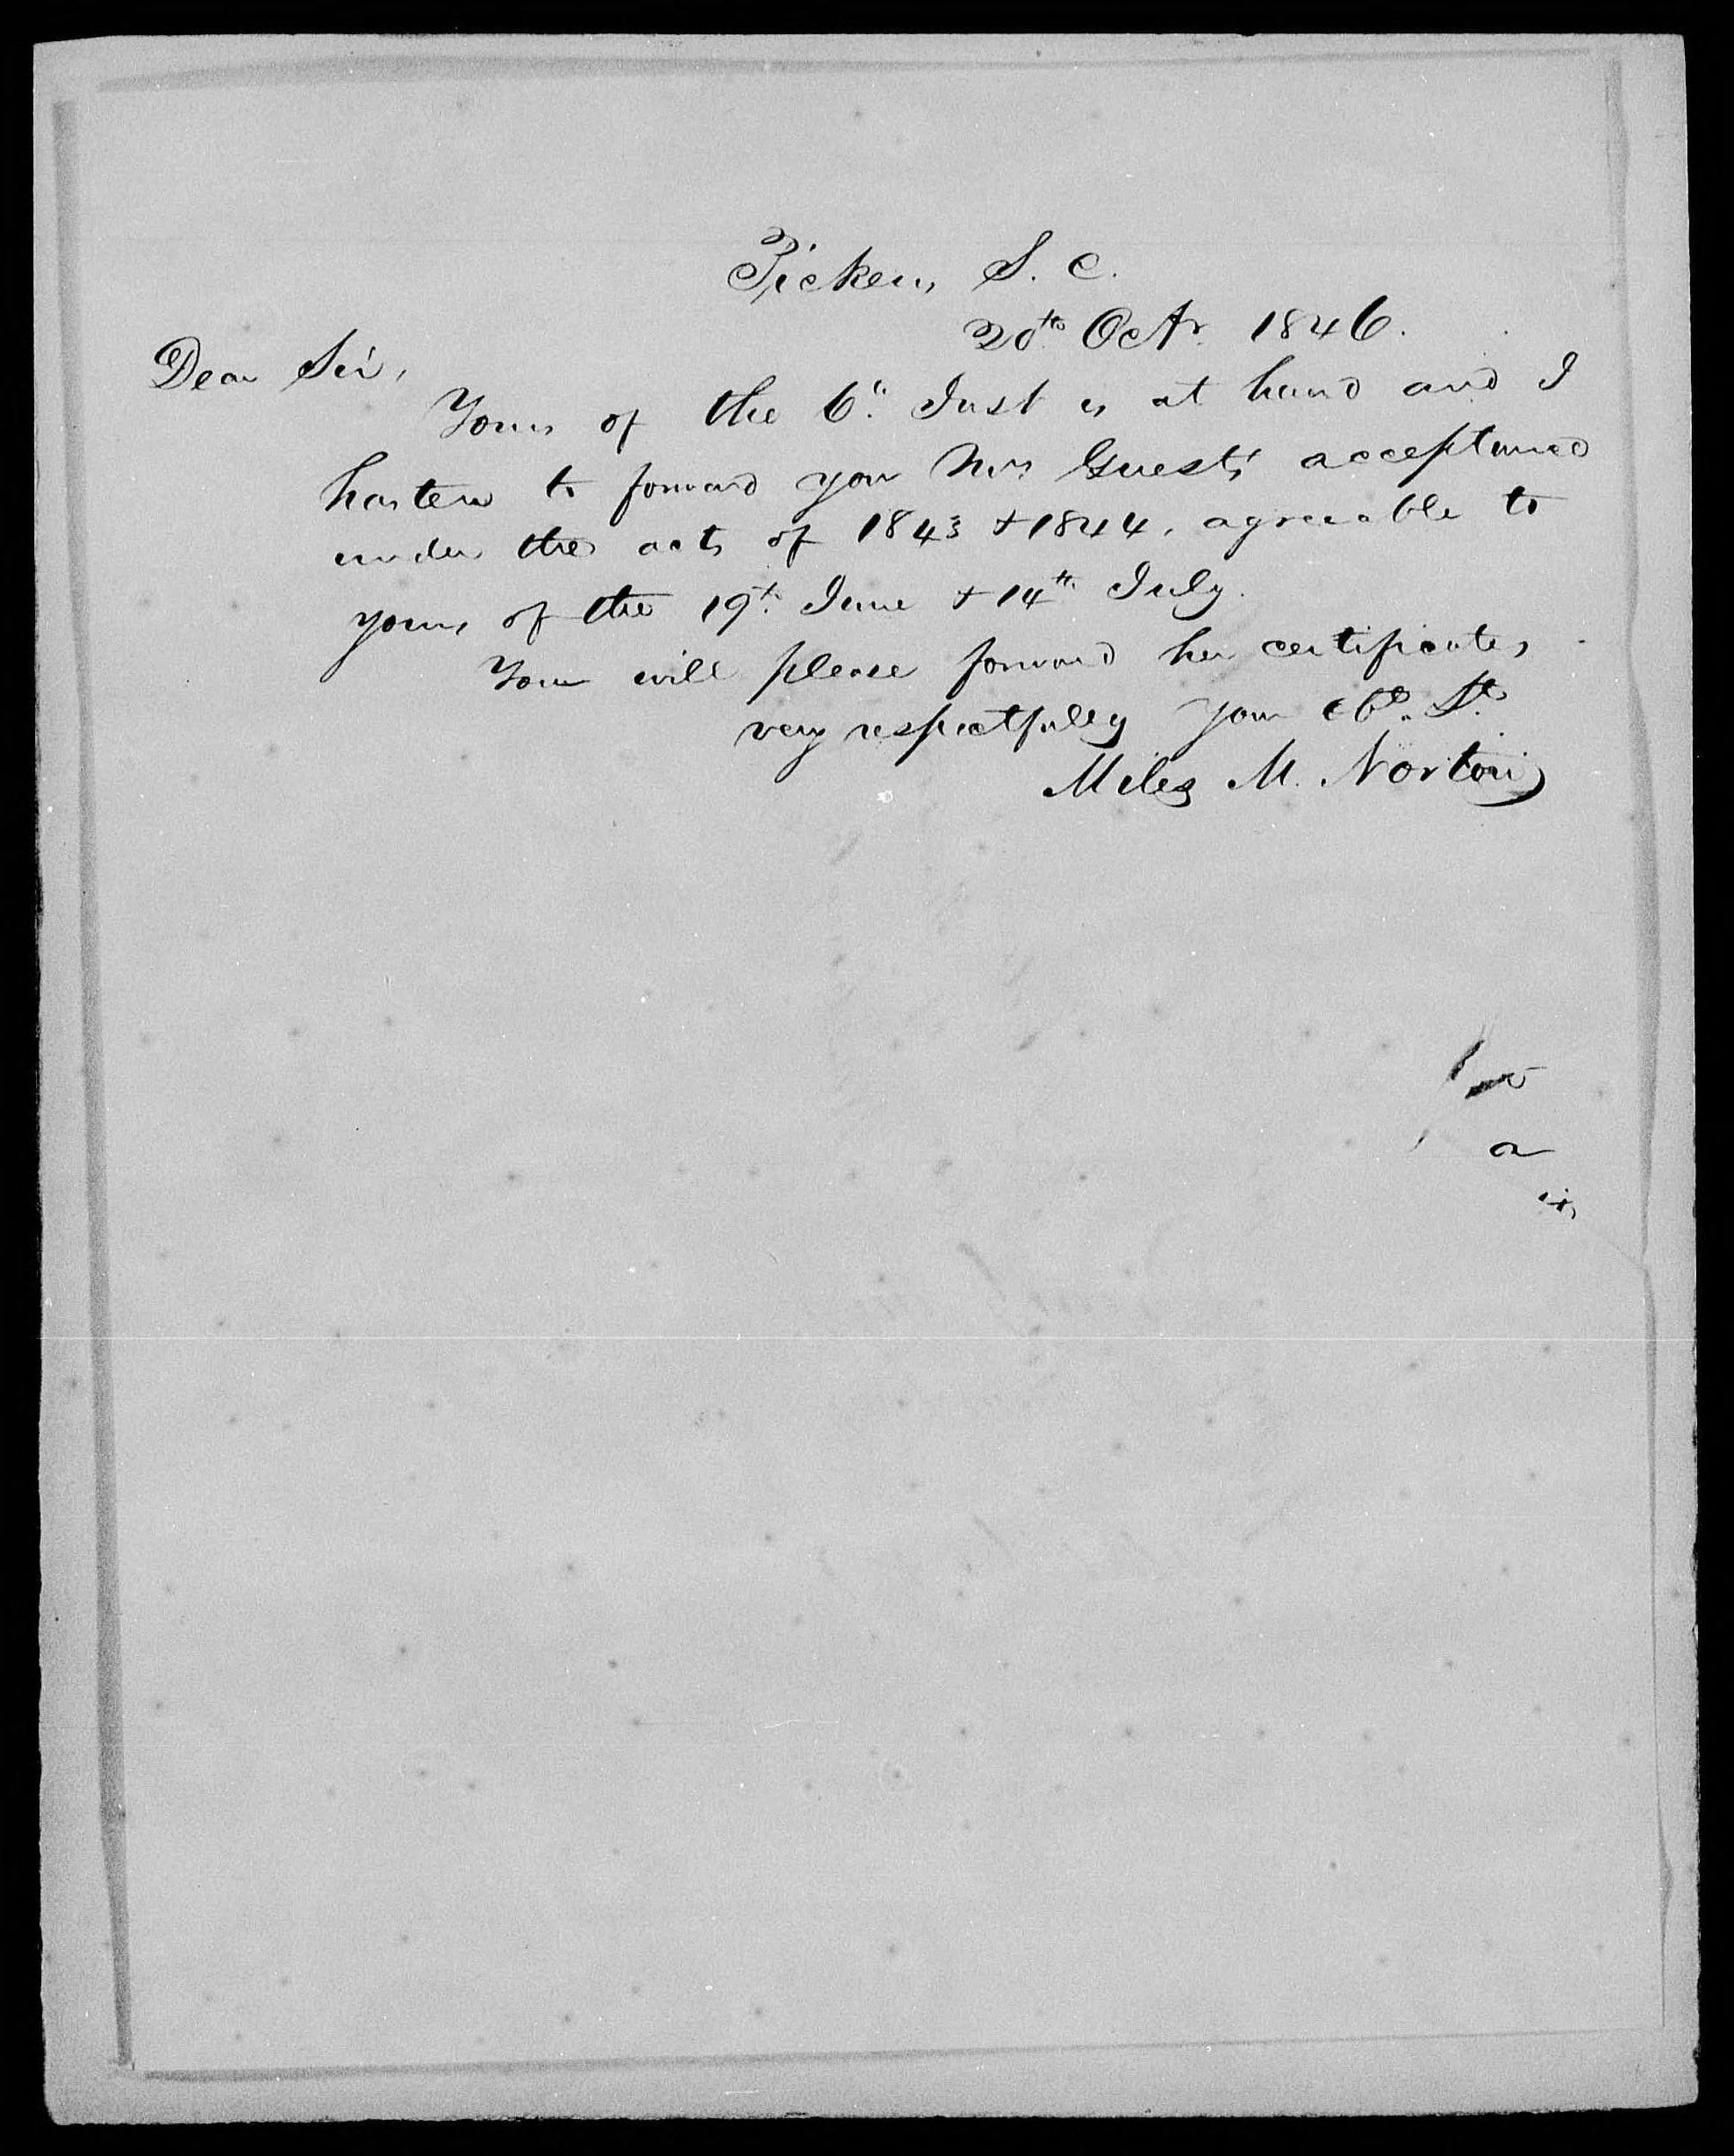 Letter from Miles M. Norton to James L. Edwards, 20 October 1846, page 1